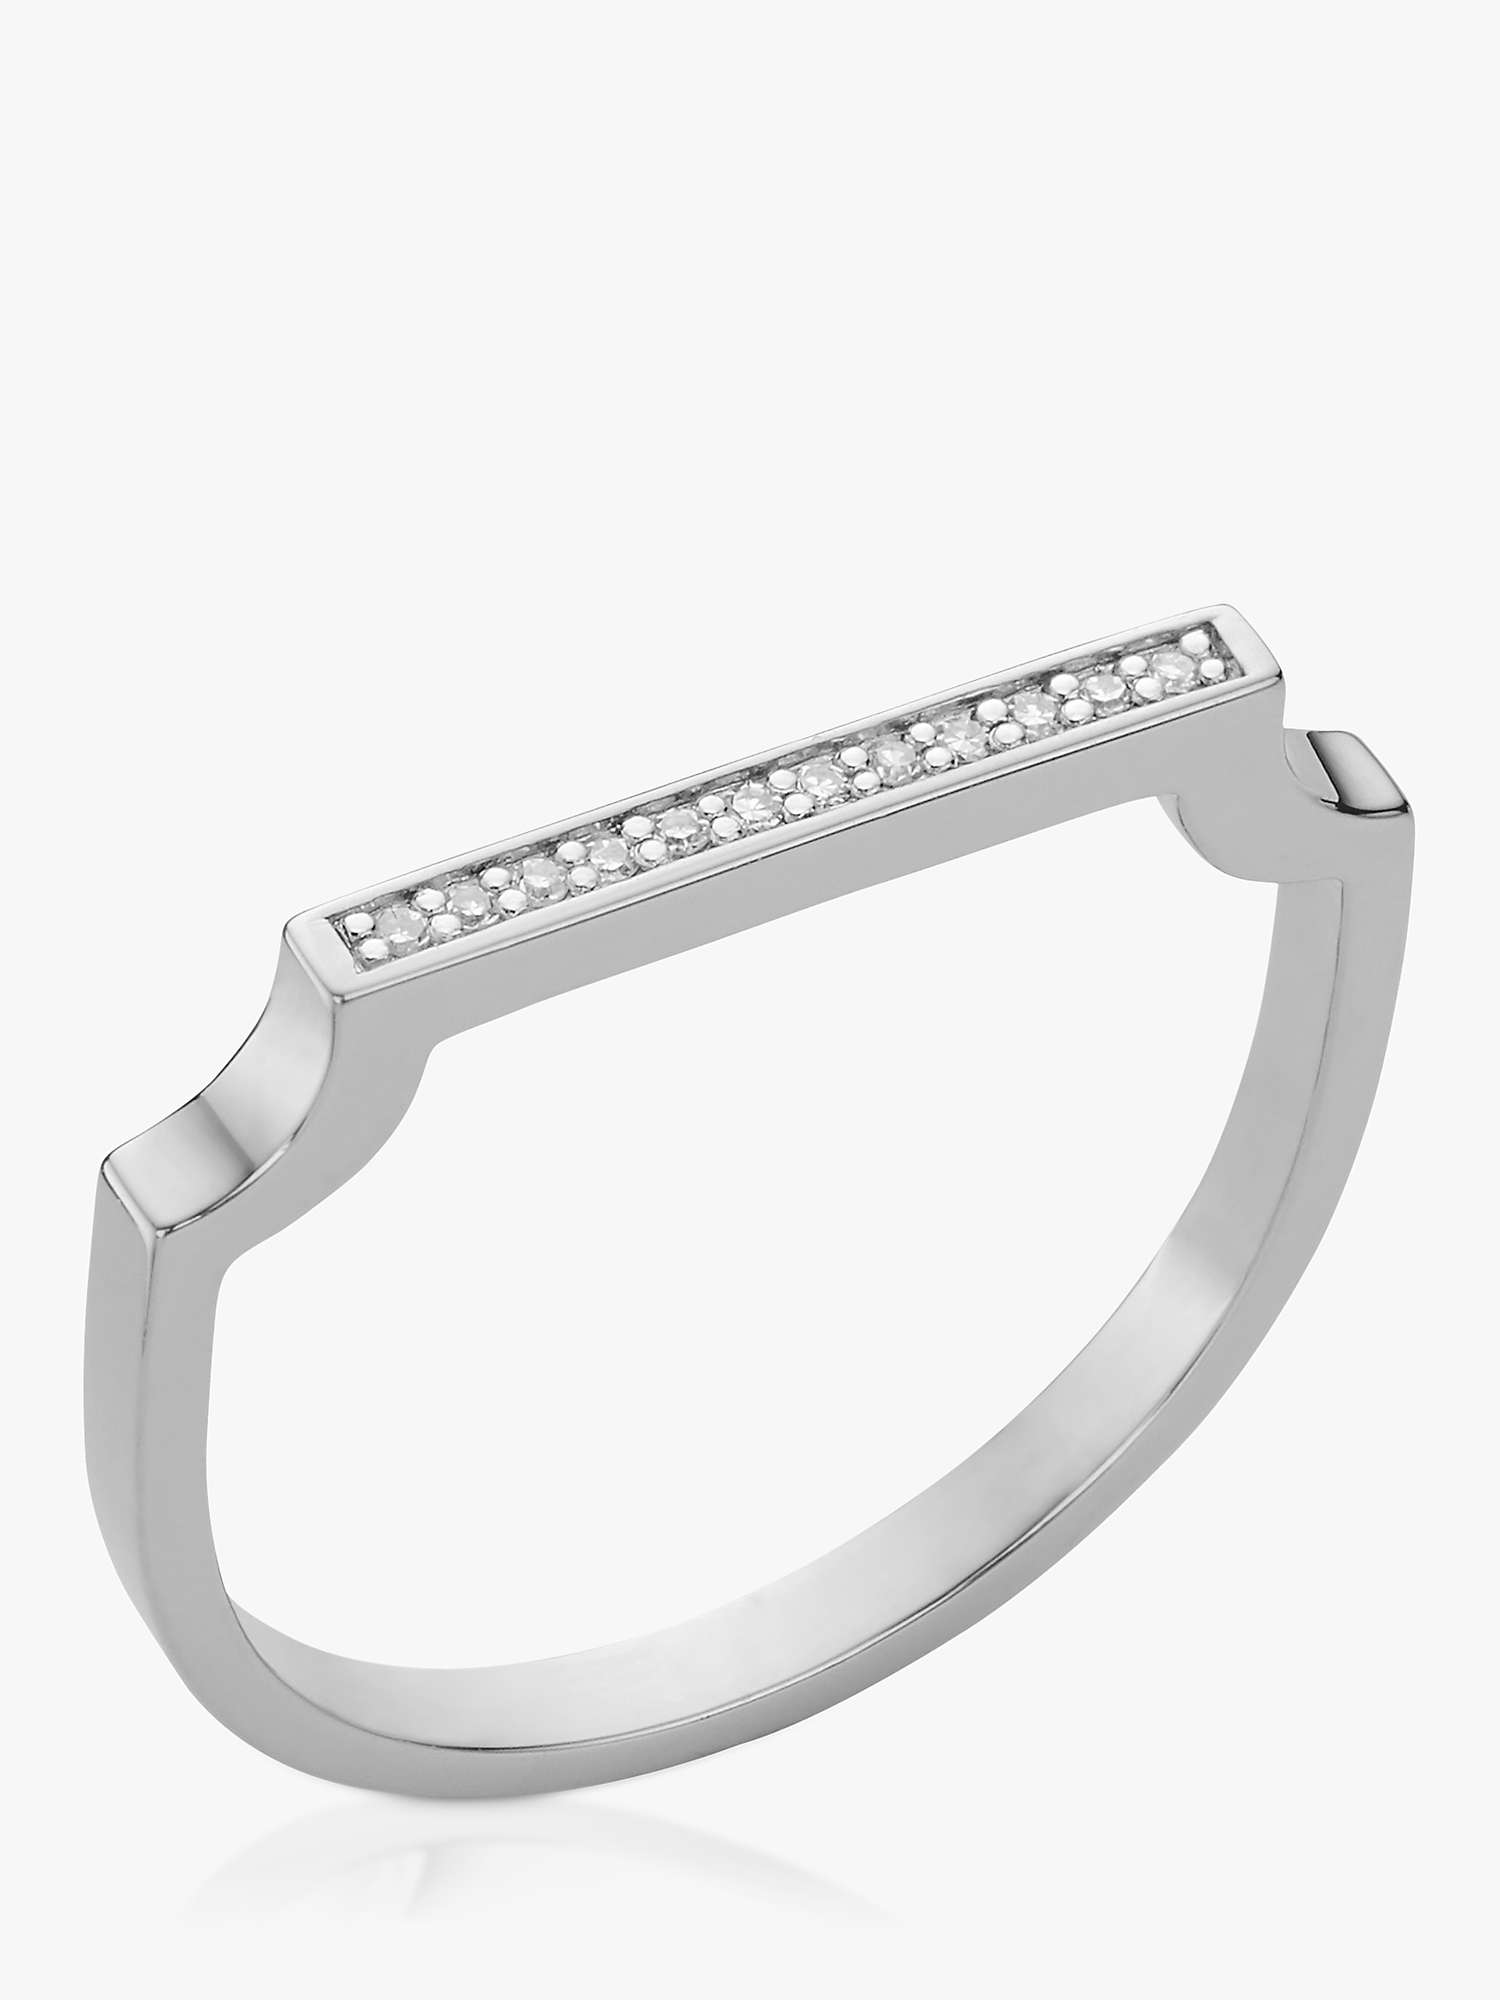 Buy Monica Vinader Signature Thin Diamond Ring, Silver Online at johnlewis.com